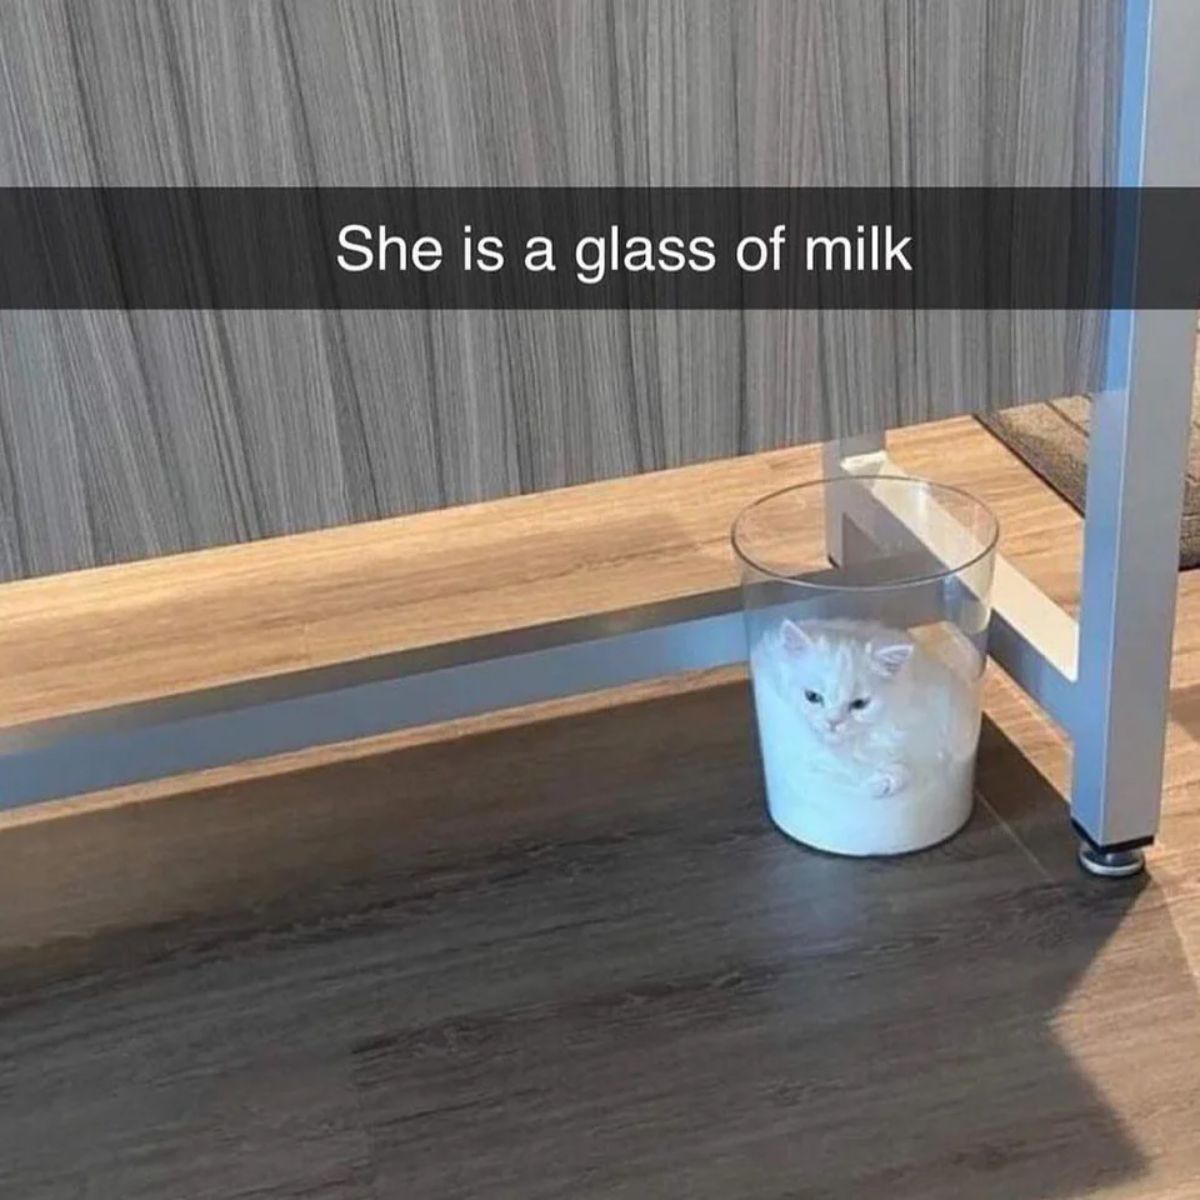 fluffy white kitten laying inside a glass with the caption saying She is a glass of milk